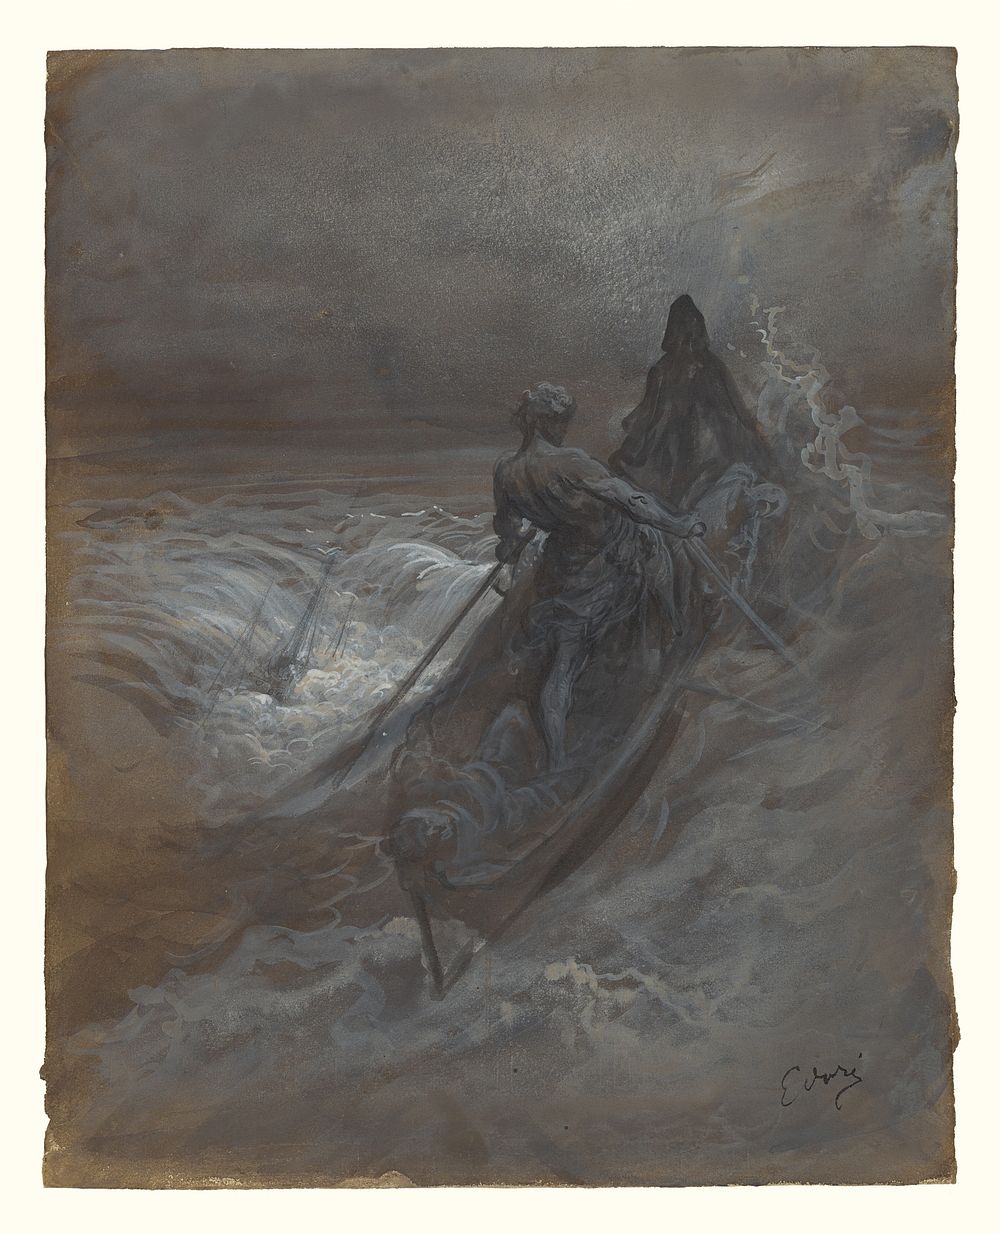 After the Shipwreck - Design for an Illustration of Coleridge's The Rime of the Ancient Mariner by Gustave Doré